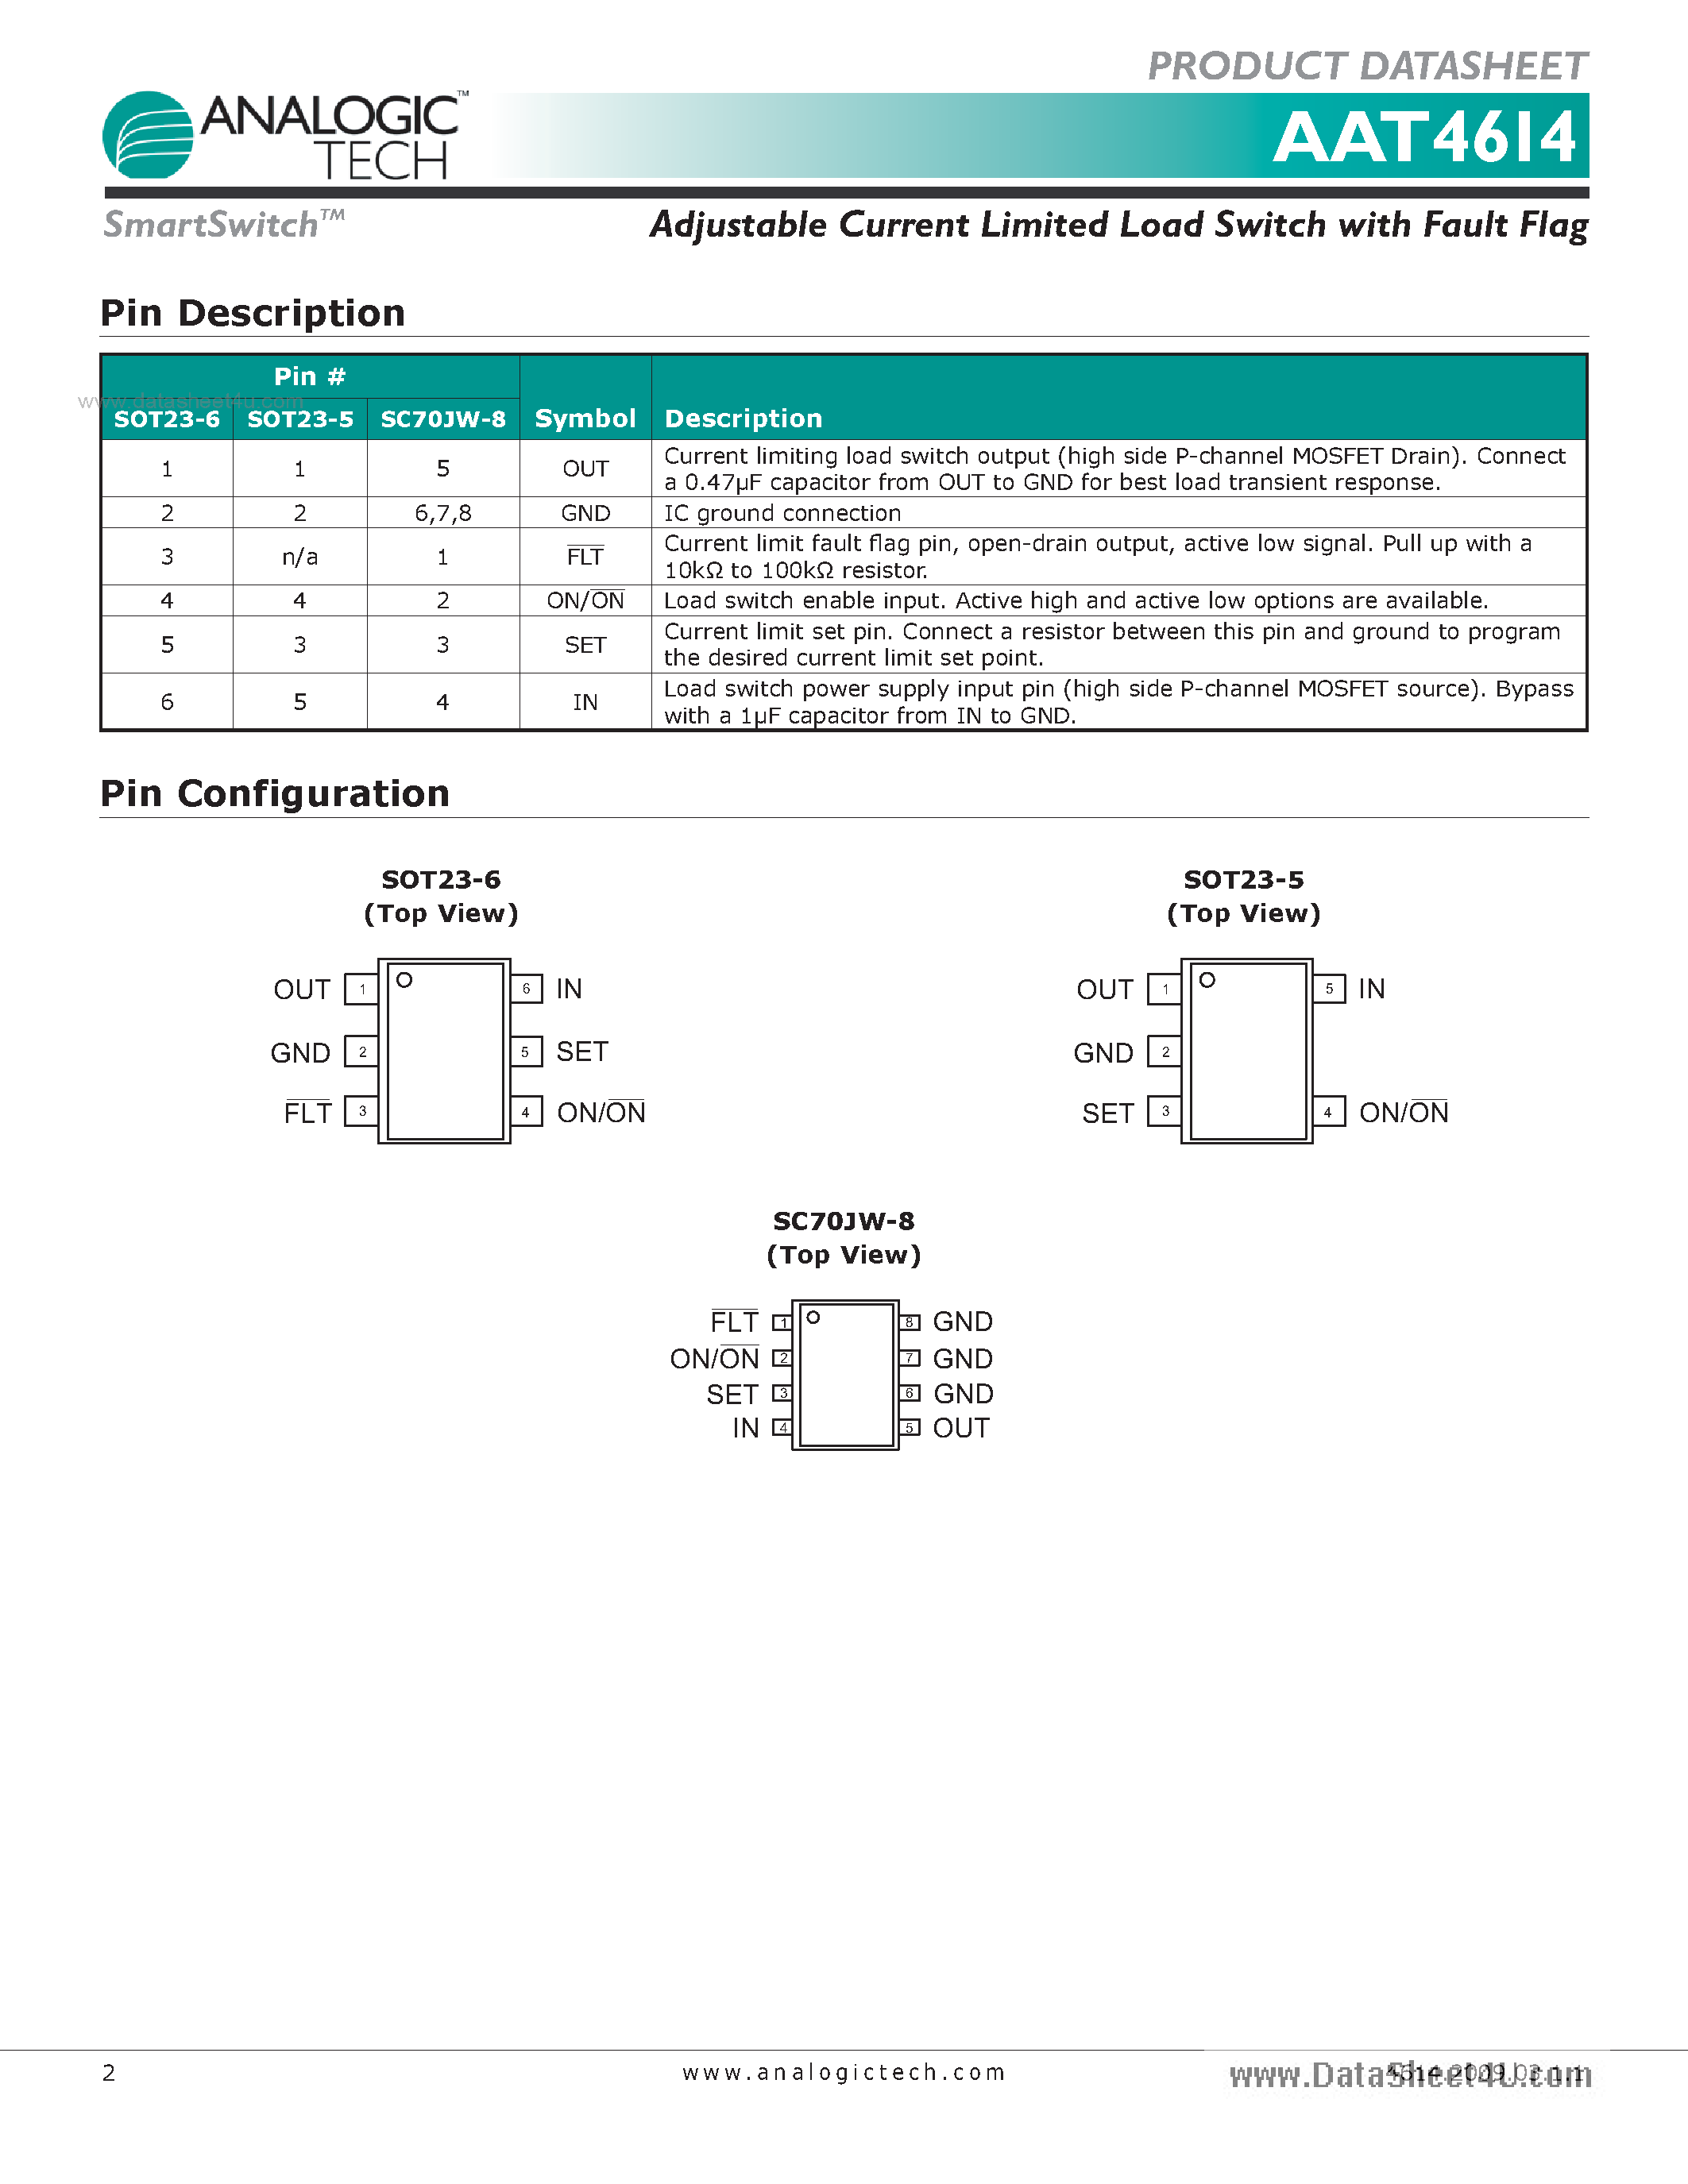 Datasheet AAT4614 - Adjustable Current Limited Load Switch page 2